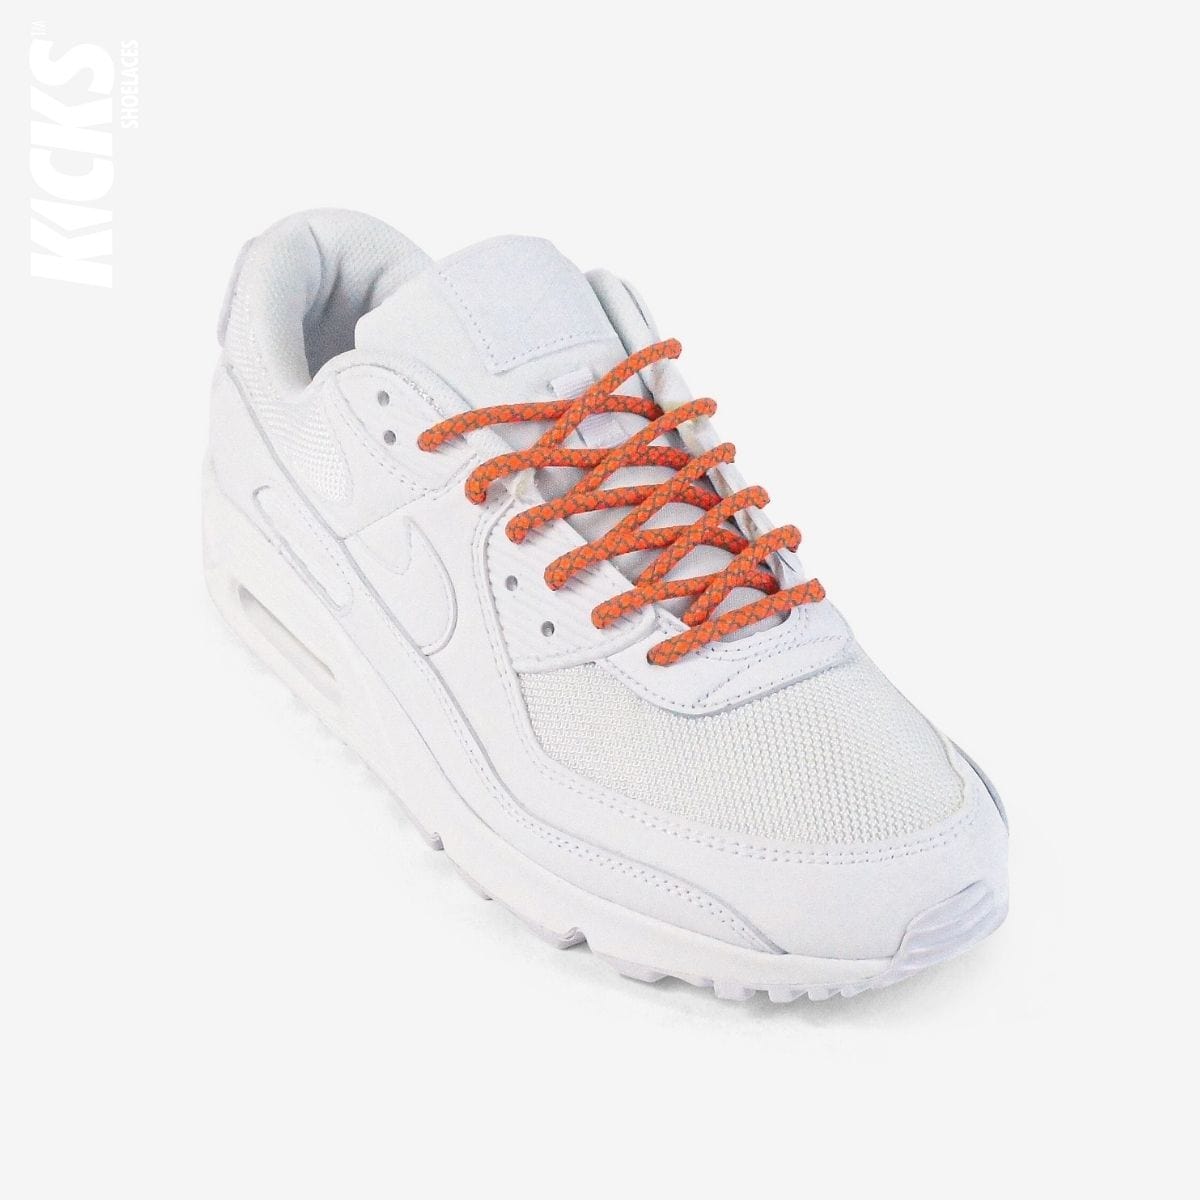 rope-laces-on-white-sneakers-with-kids-orange-shoelaces